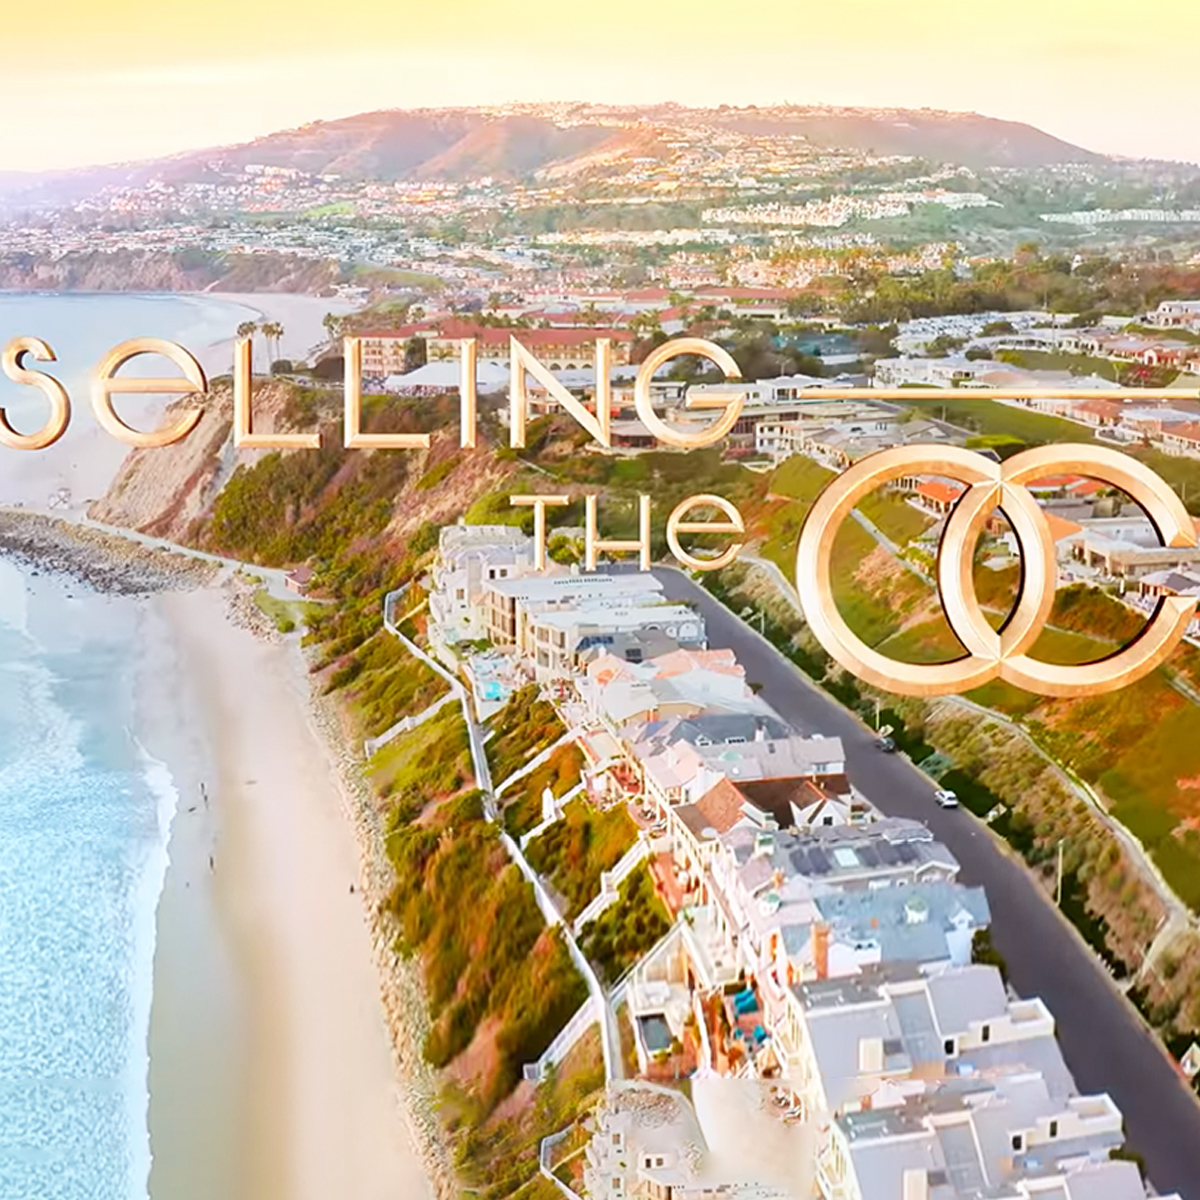 Selling Sunset season 7 trailer features Selling the OC crossover